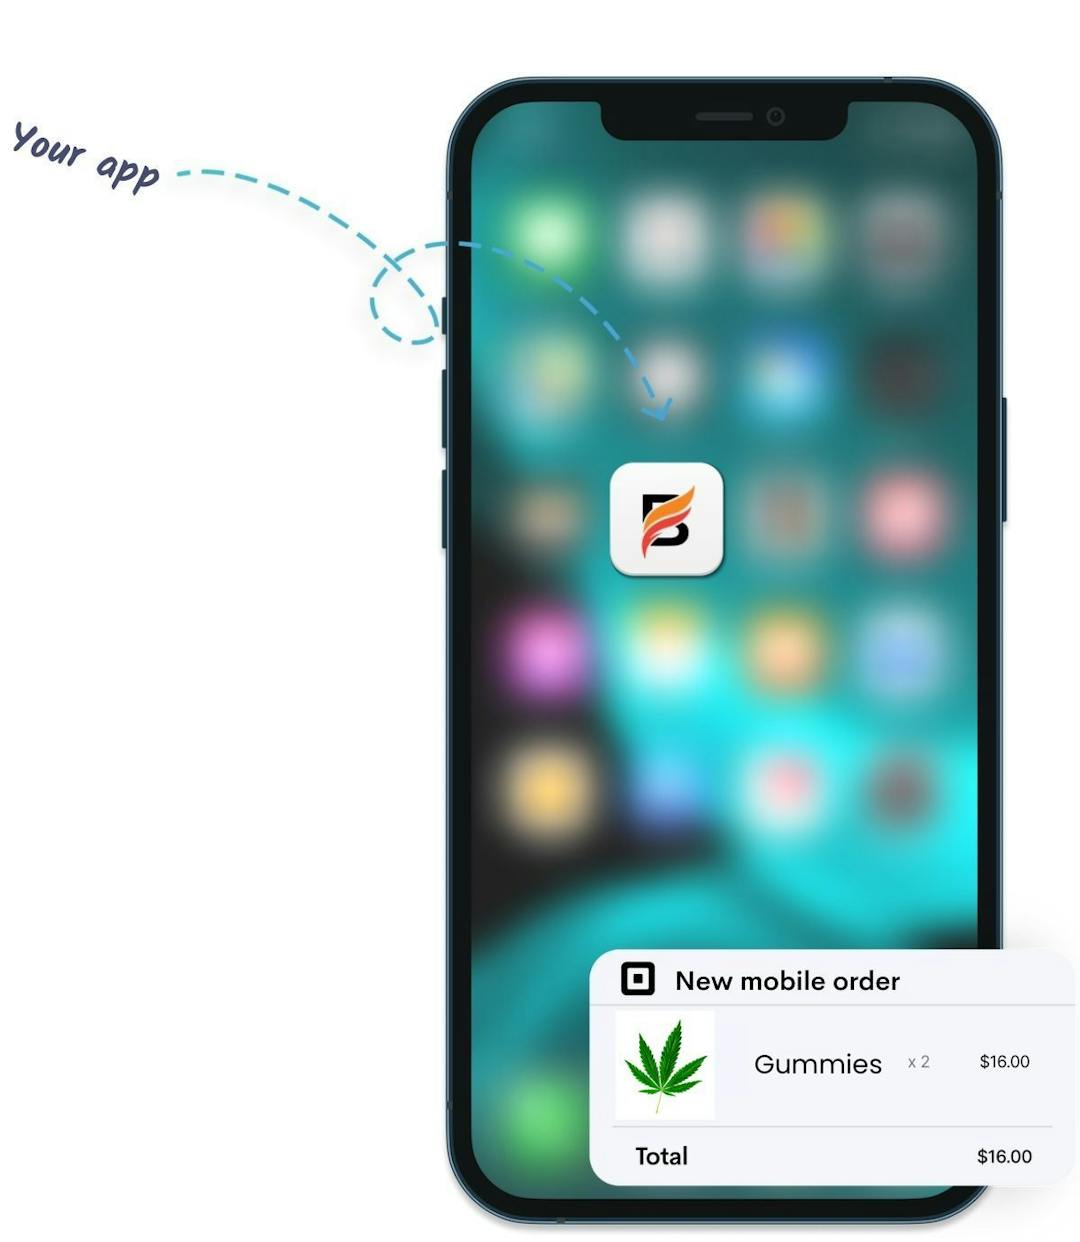 <h2 style="letter-spacing:-2.5px;line-height:70px">Mobile Ordering App for Cannabis Stores</h2>